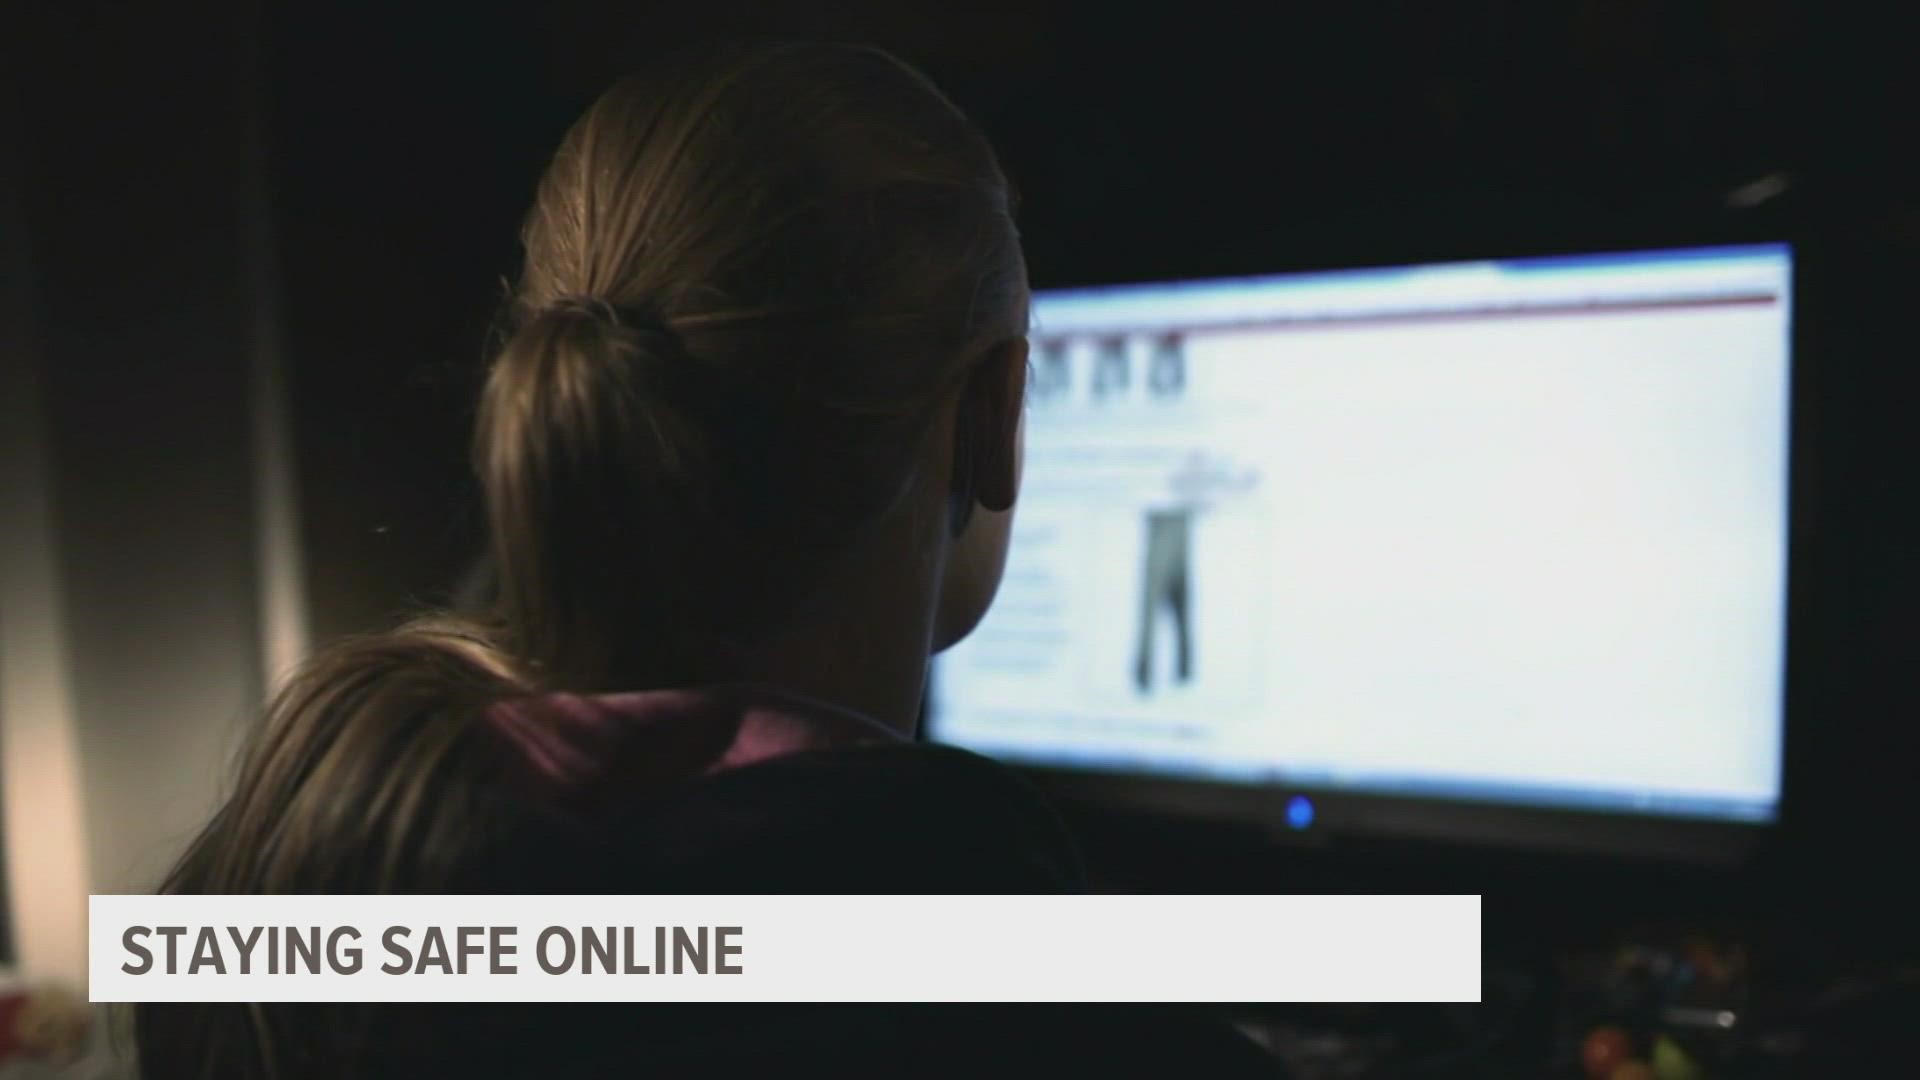 A cyber security specialist give tips to stay safe online.